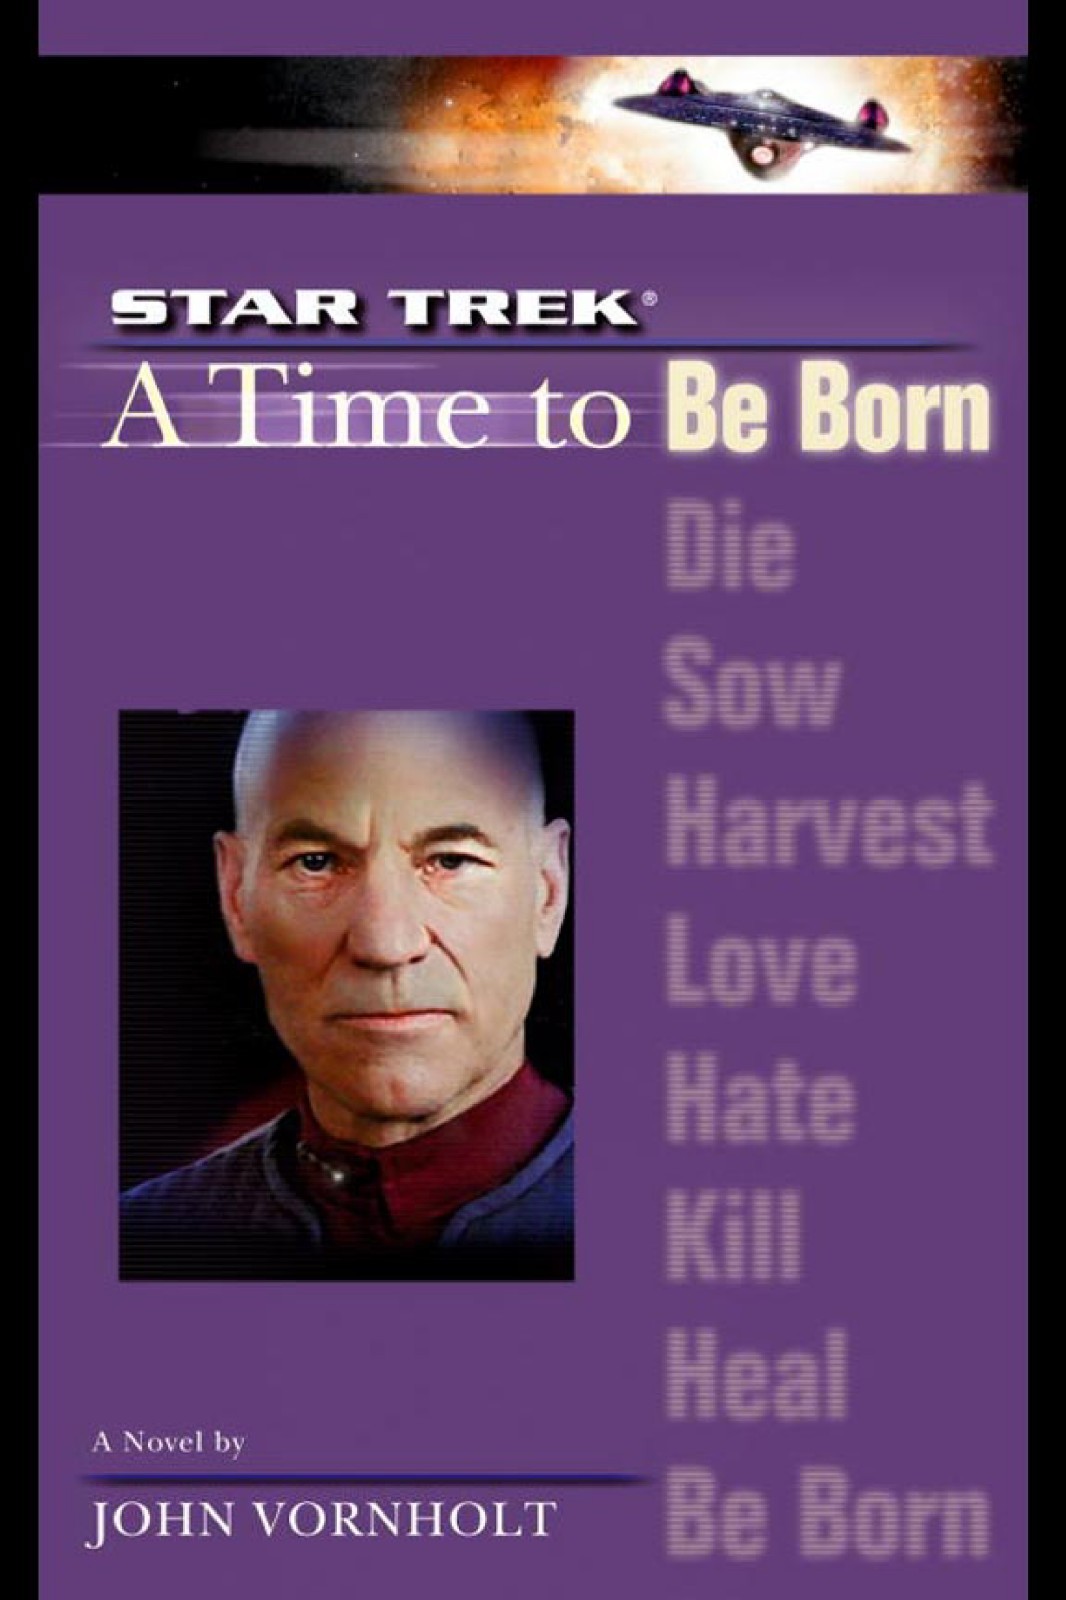 TNG 108 - A Time to Be Born